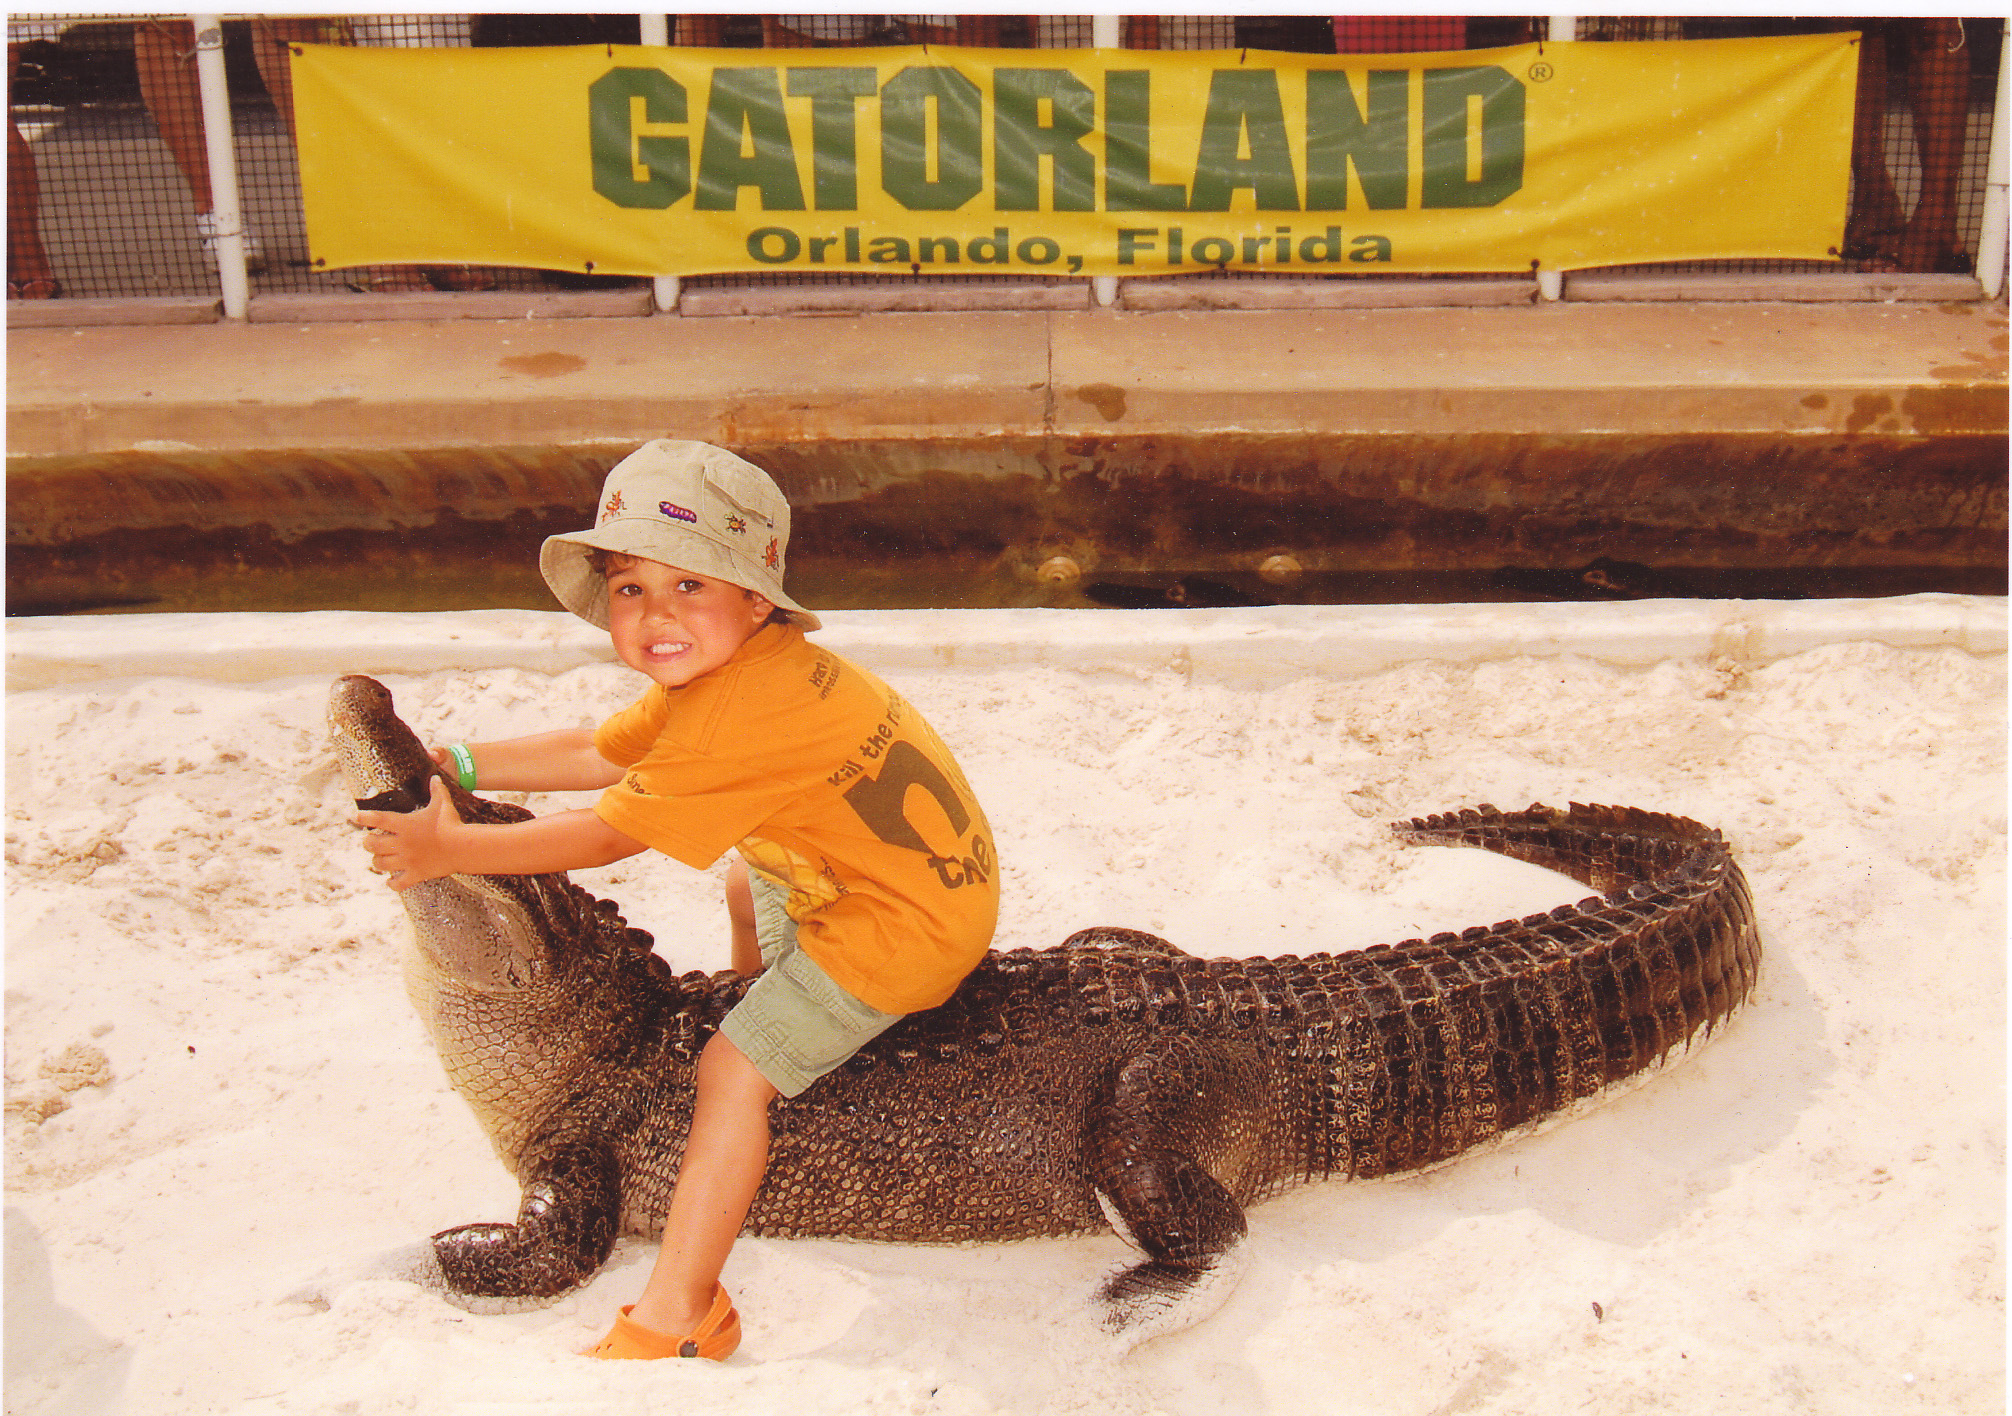 I always make sure my son is safely buckled into his carseat, I have child-proof locks on all my cabinets and I let him sit on a live gator at Gatorland. Yeah, that makes sense.